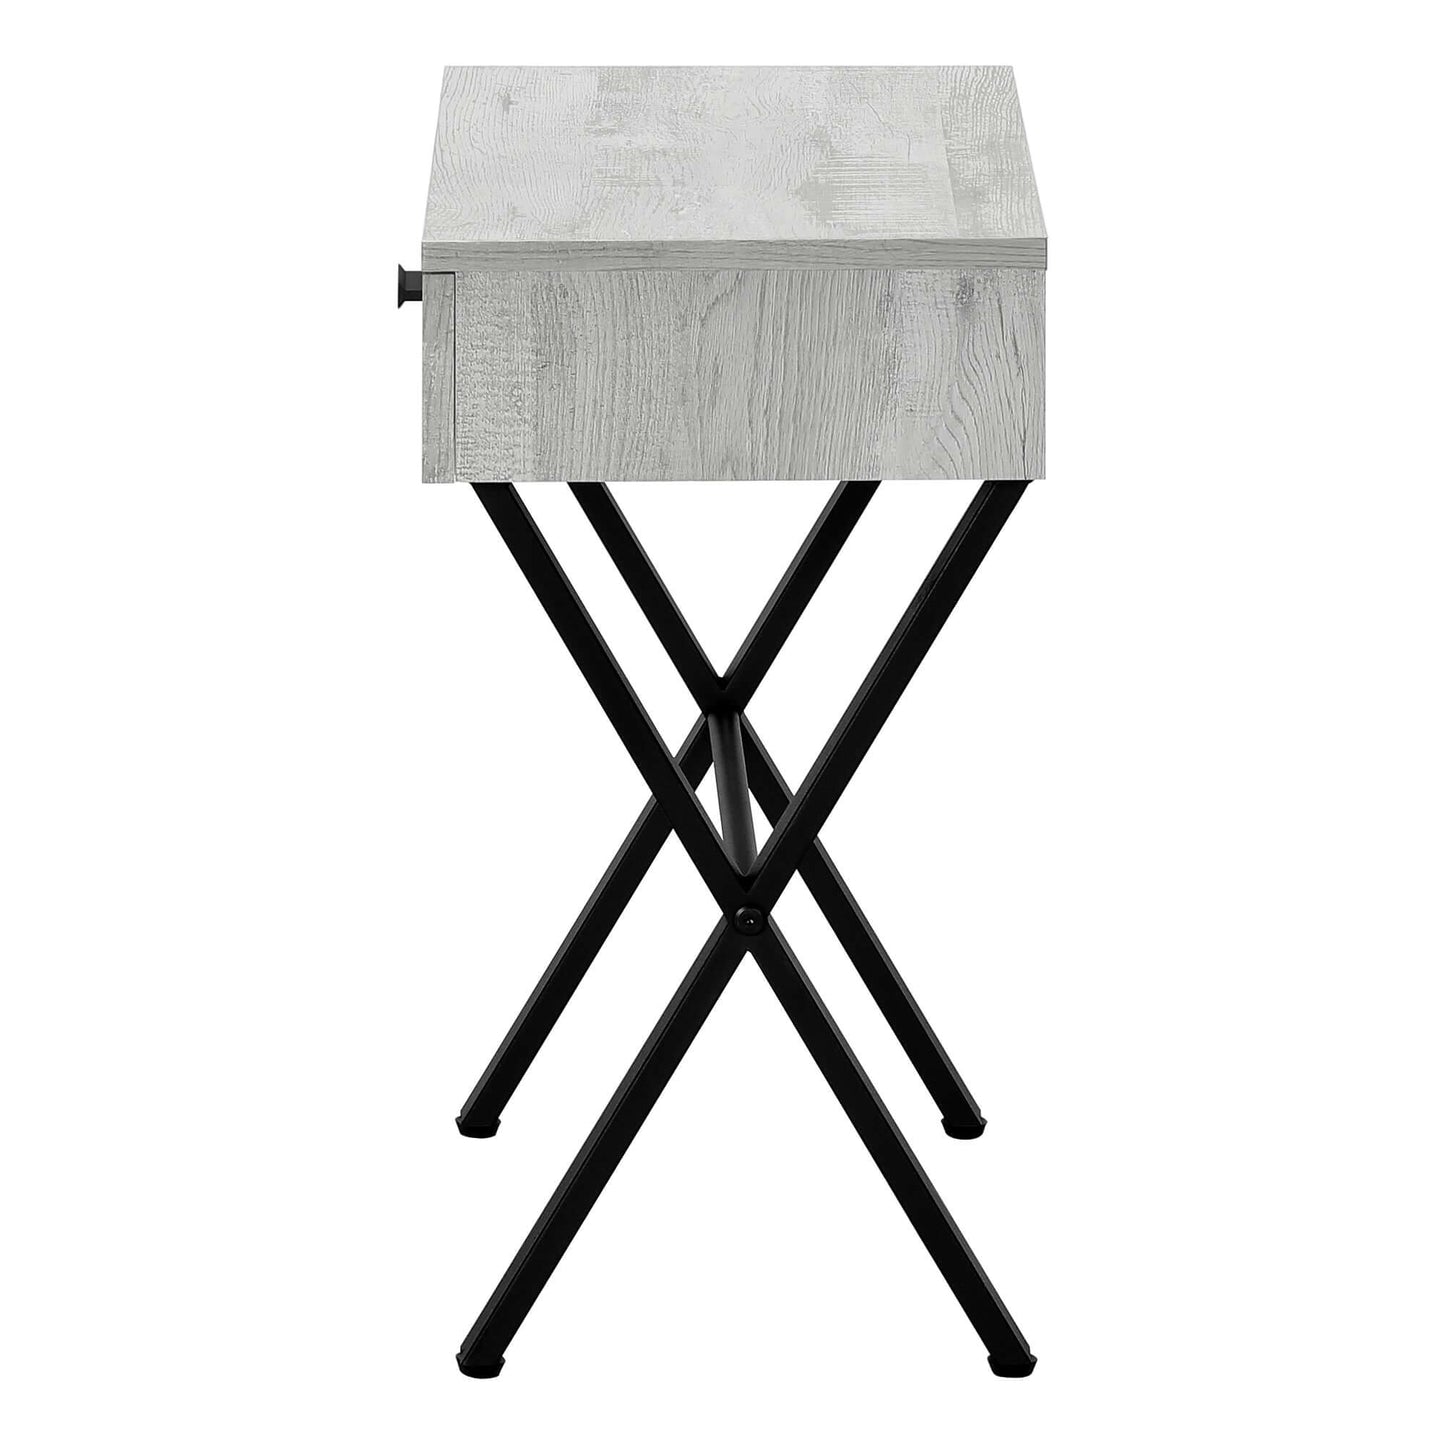 Modern Nightstand in Grey Reclaimed Wood Finish with Black Metal Frame